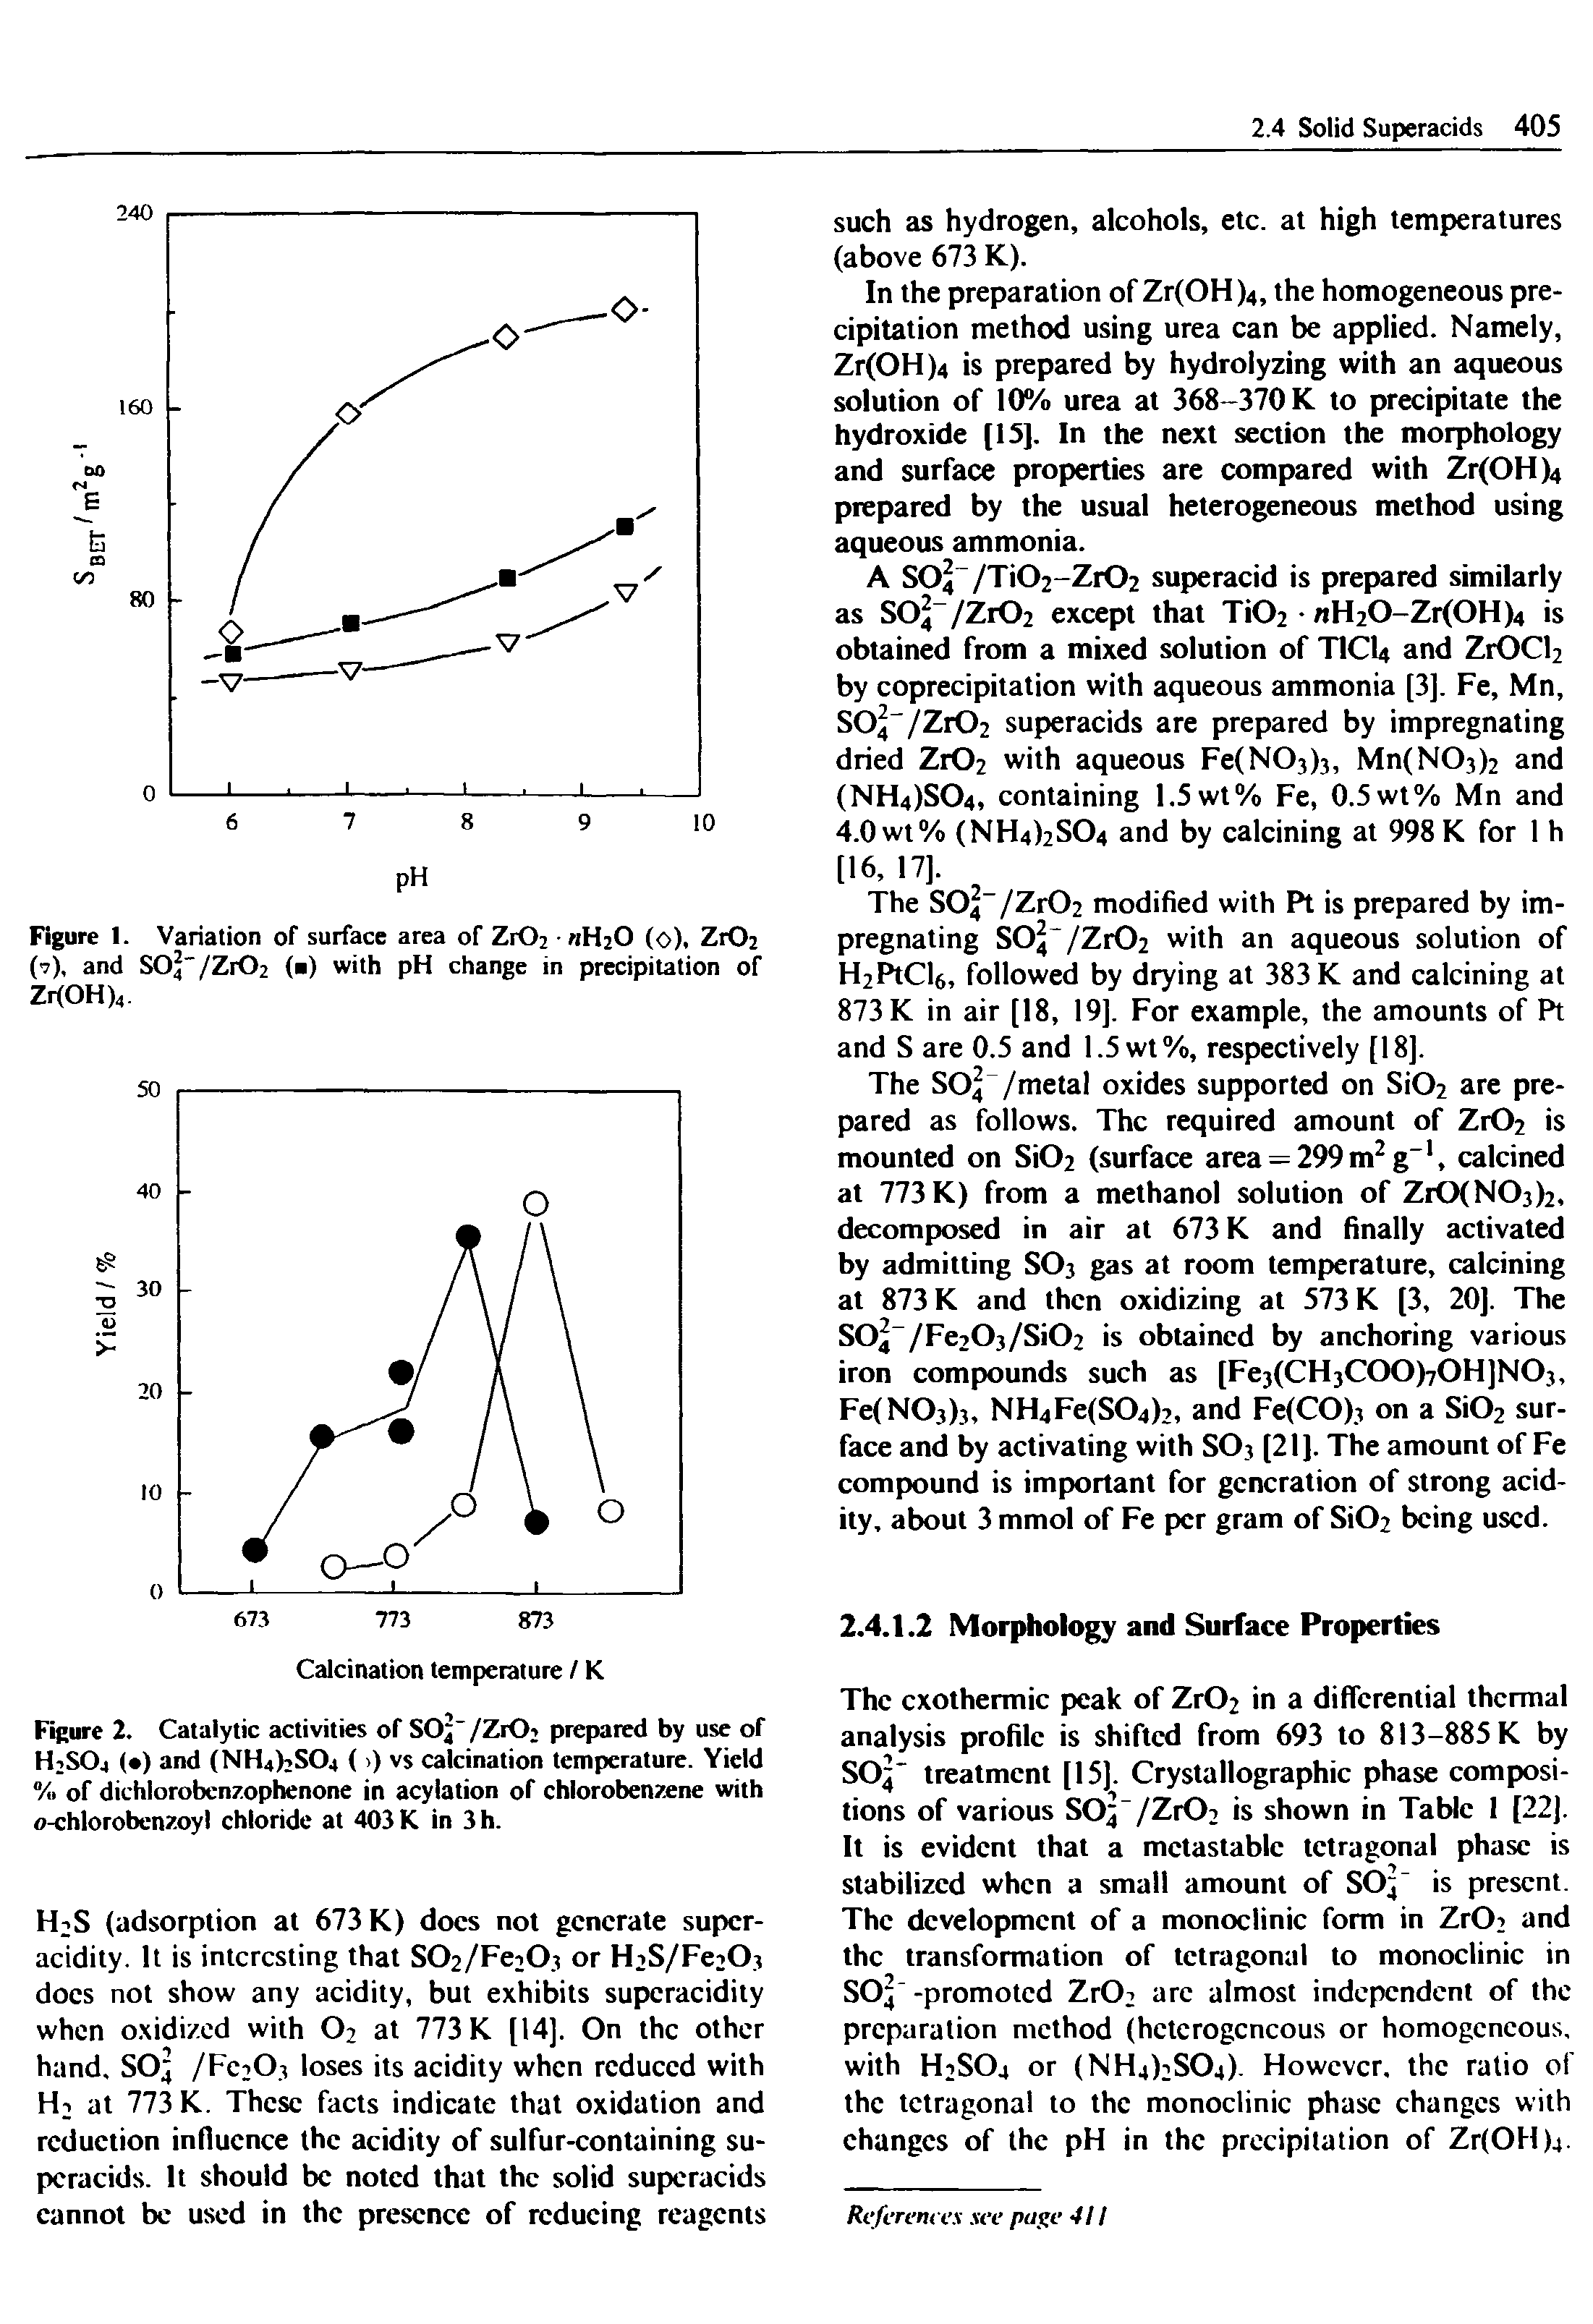 Figure 2. Catalytic activities of SO /ZrCK prepared by use of HiSOj ( ) and (NH4) S04 ( >) vs calcination temperature. Yield % of dichlorobenzophenone in acylation of chlorobenzene with o-chlorobenzoyl chloride at 403 K in 3 h.